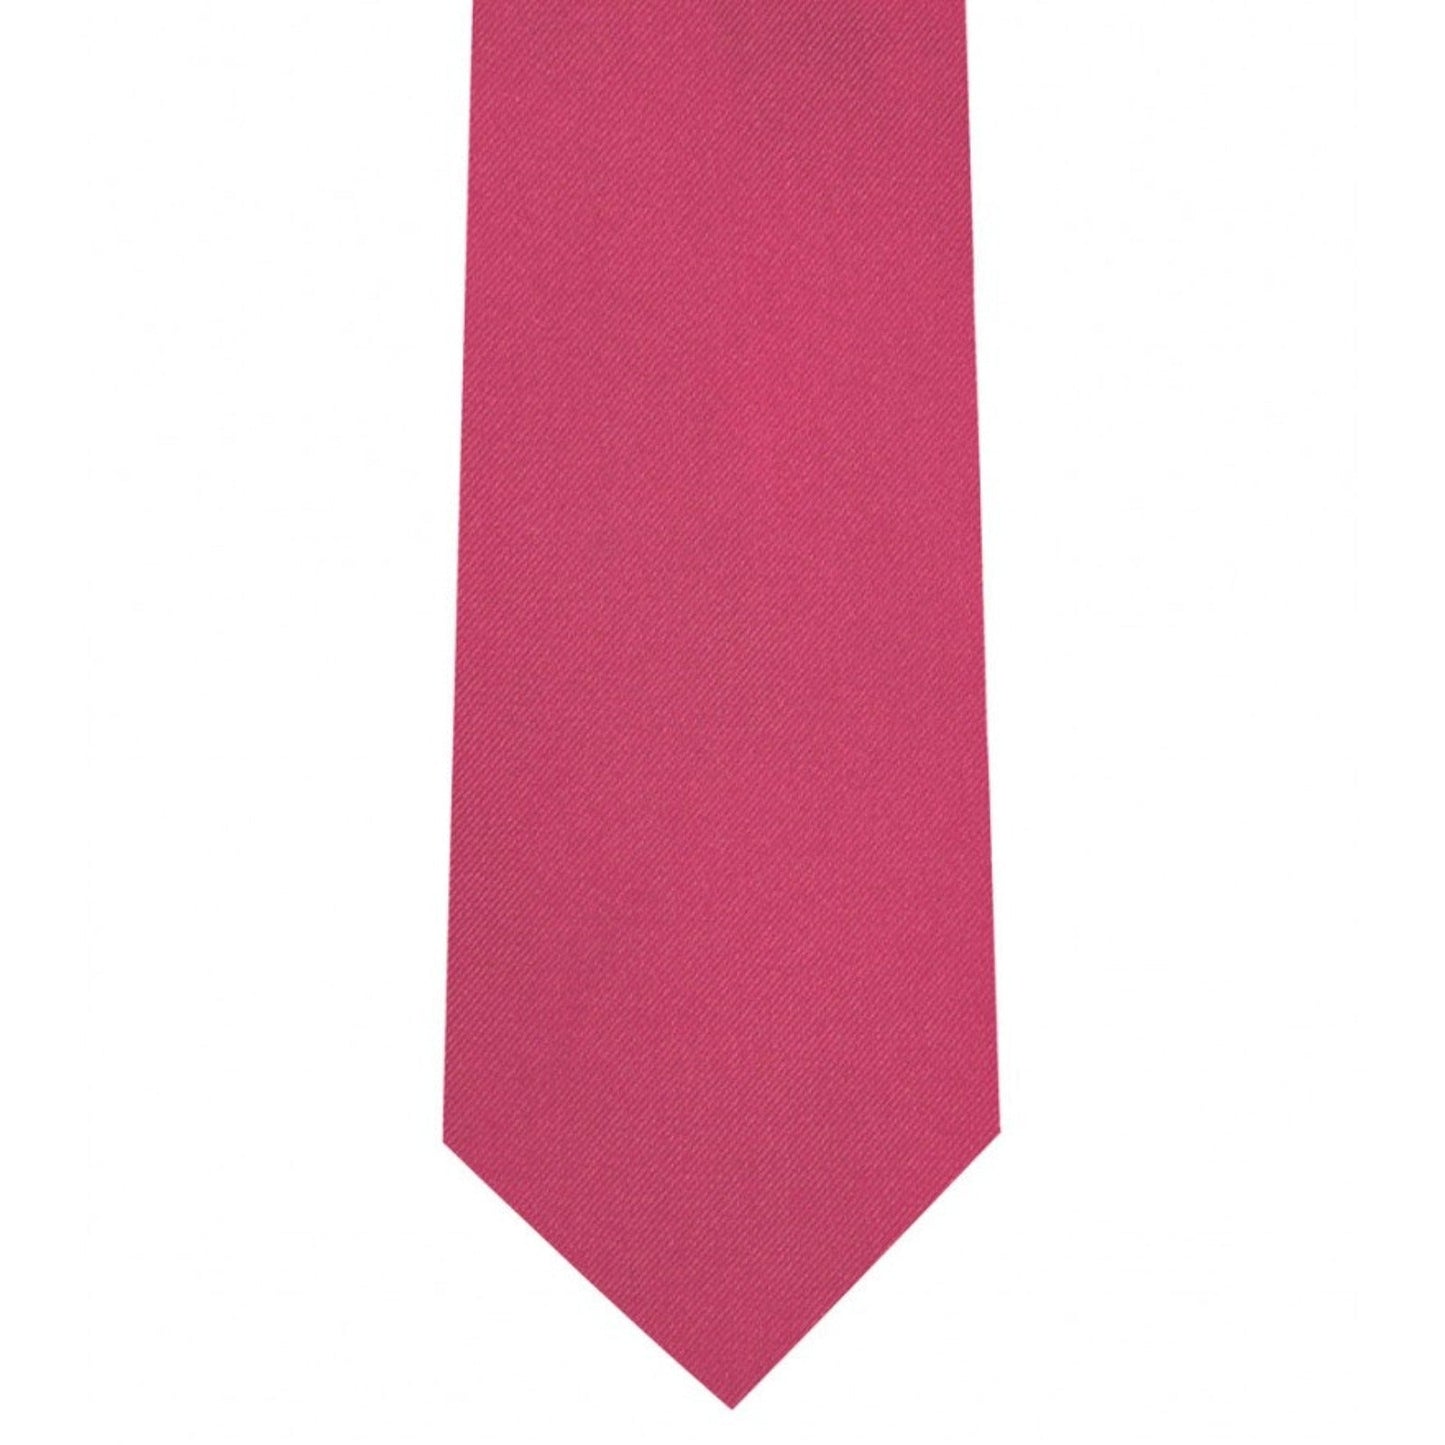 Classic French Rose Tie Ultra Skinny tie width 2.25 inches With Matching Pocket Square | KCT Menswear